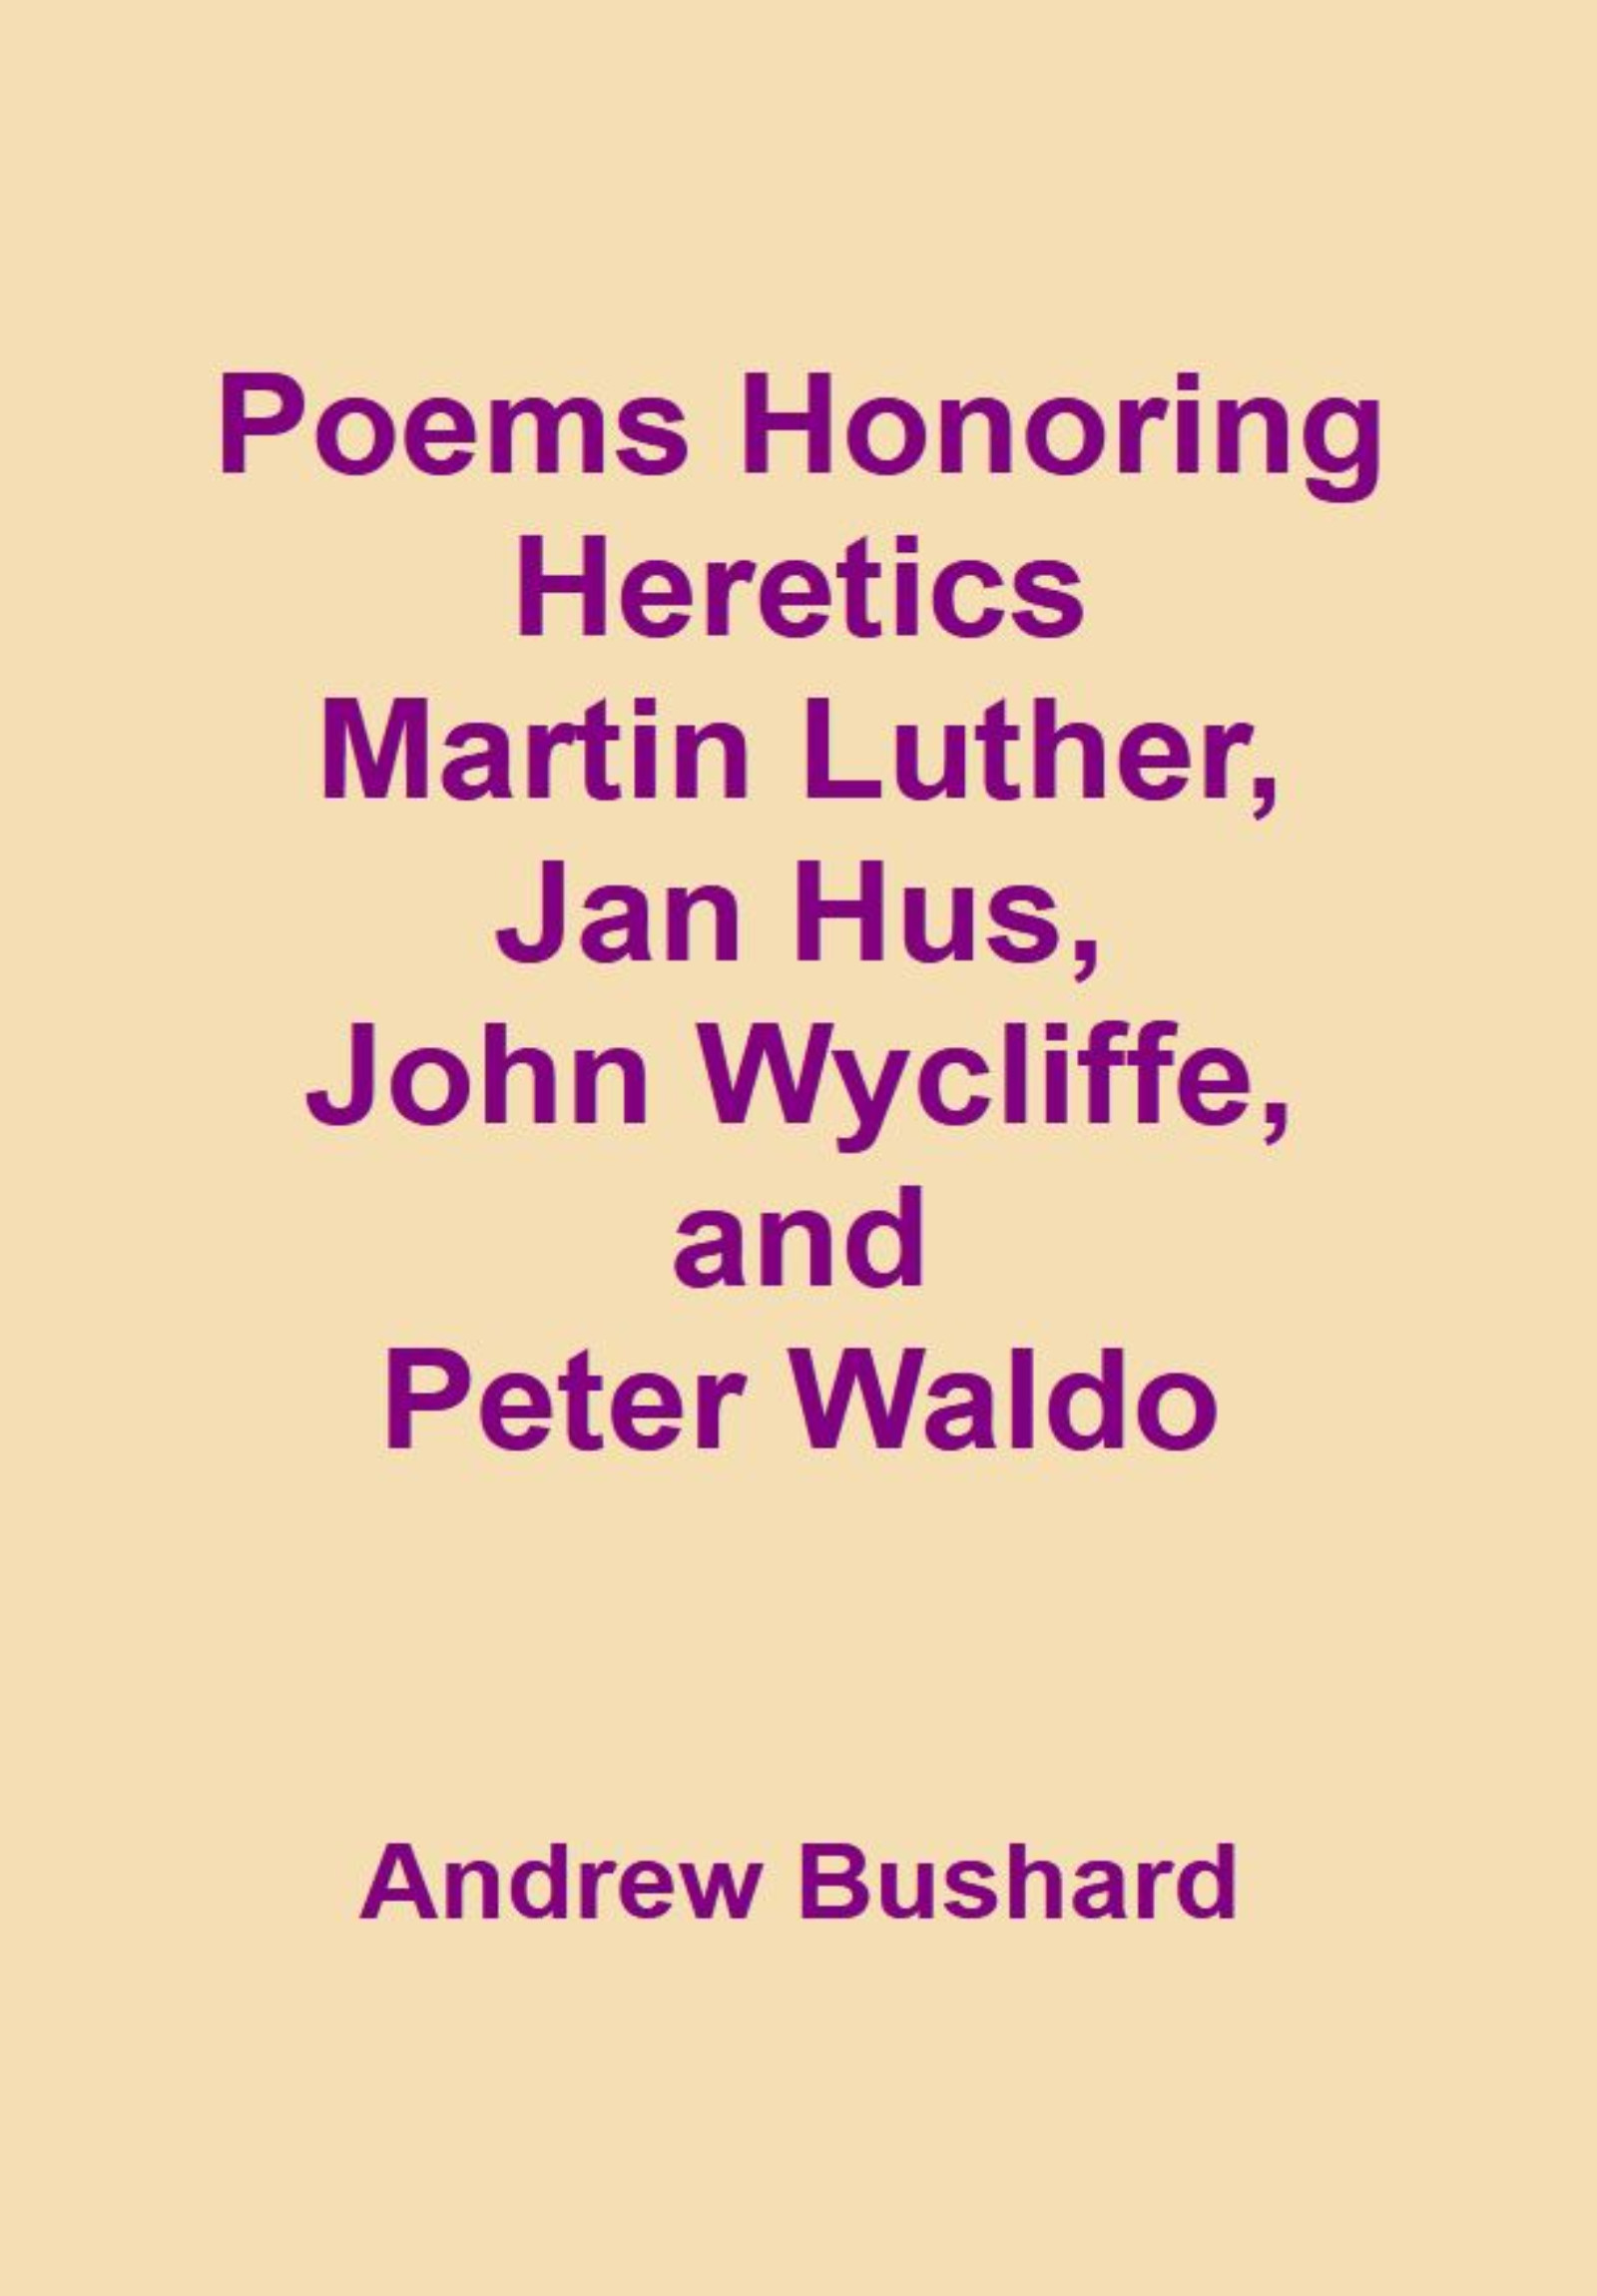 Poems Honoring Heretics Martin Luther, Jan Hus, John Wycliffe, and Peter Waldo's featured image